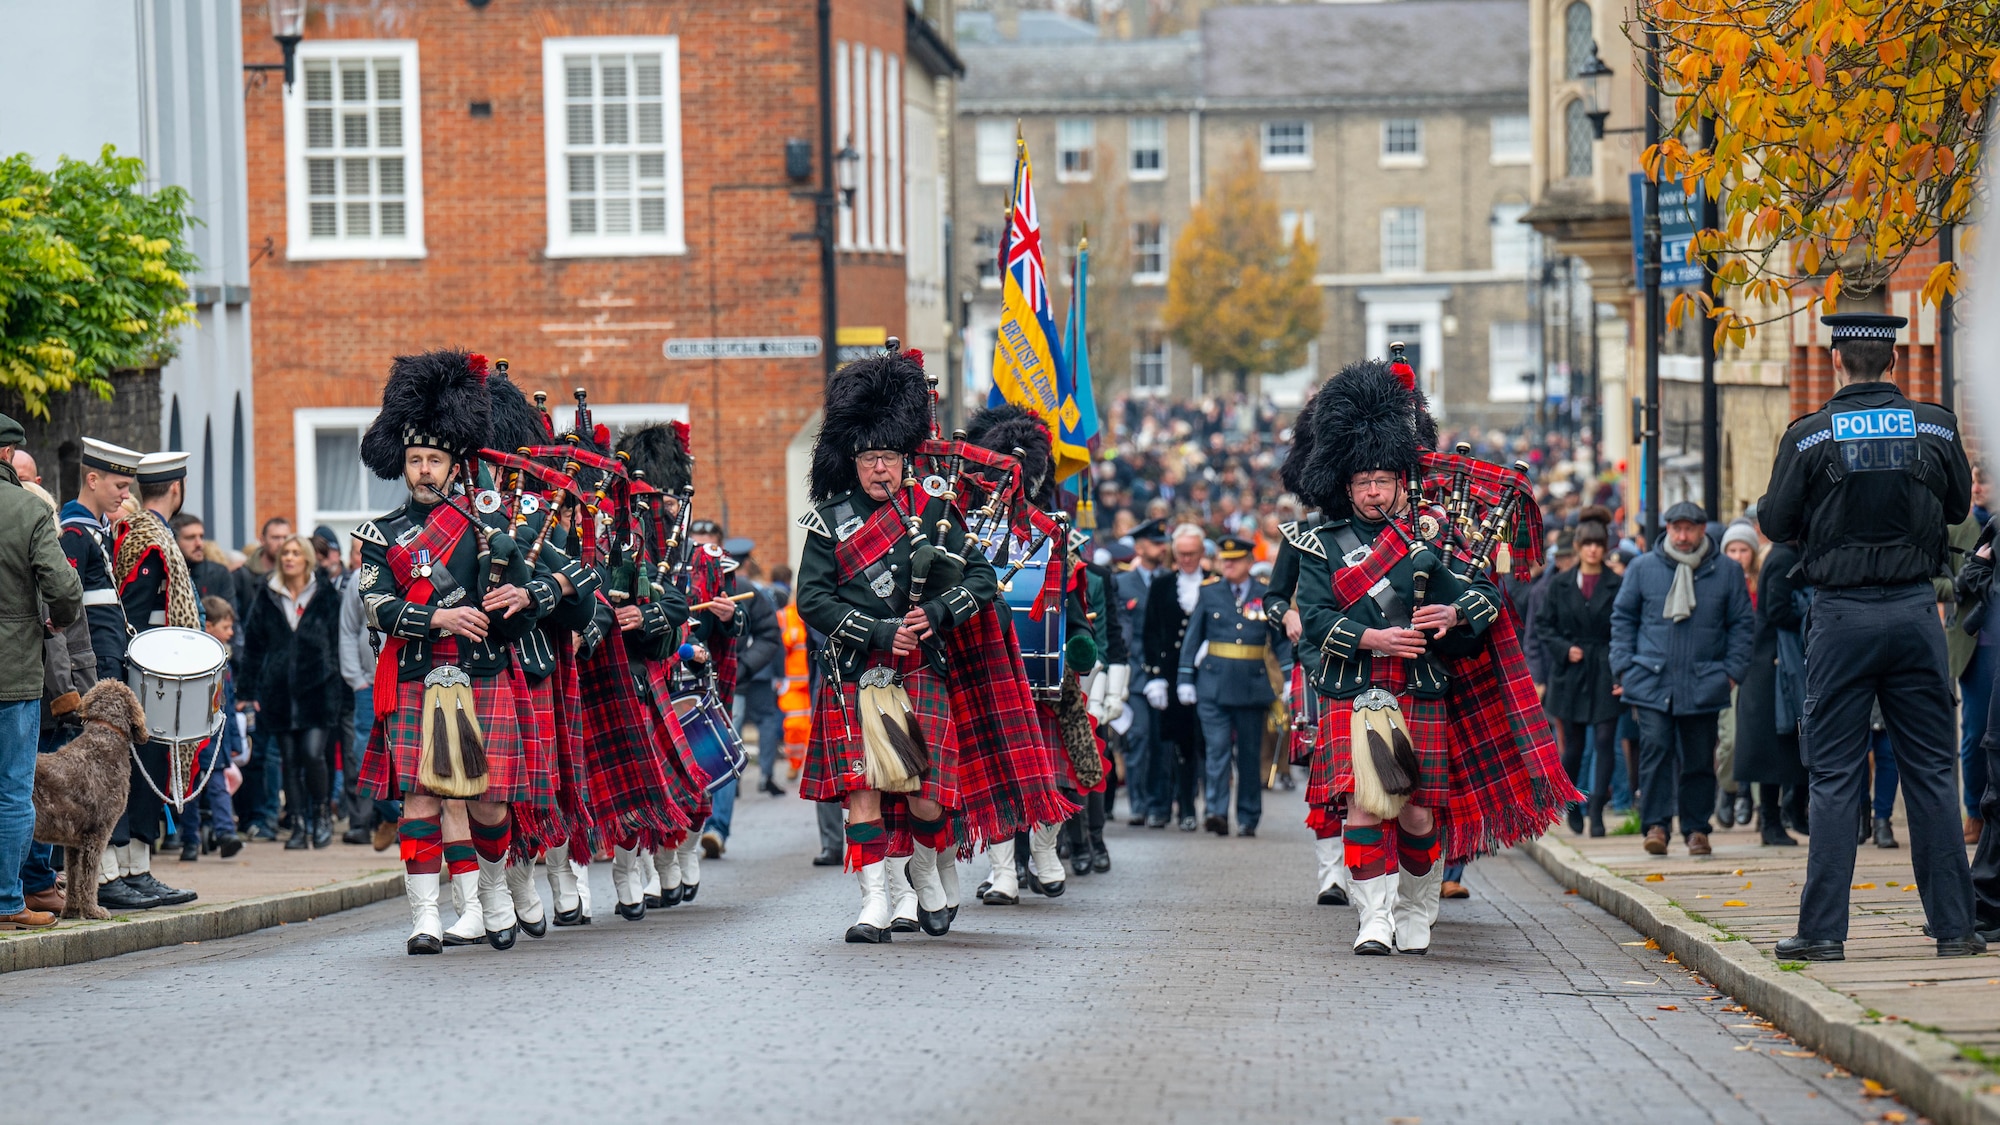 Members of the Glenmoriston Pipe Band  march in a Remembrance Day parade in Bury St. Edmunds, England, Nov. 12, 2023. The day honored the service and sacrifice of Armed Forces, British and Commonwealth veterans, as well as the allies that fought alongside them in the two World Wars and later conflicts. (U.S. Air Force photo by Airman 1st Class Seleena Muhammad-Ali)